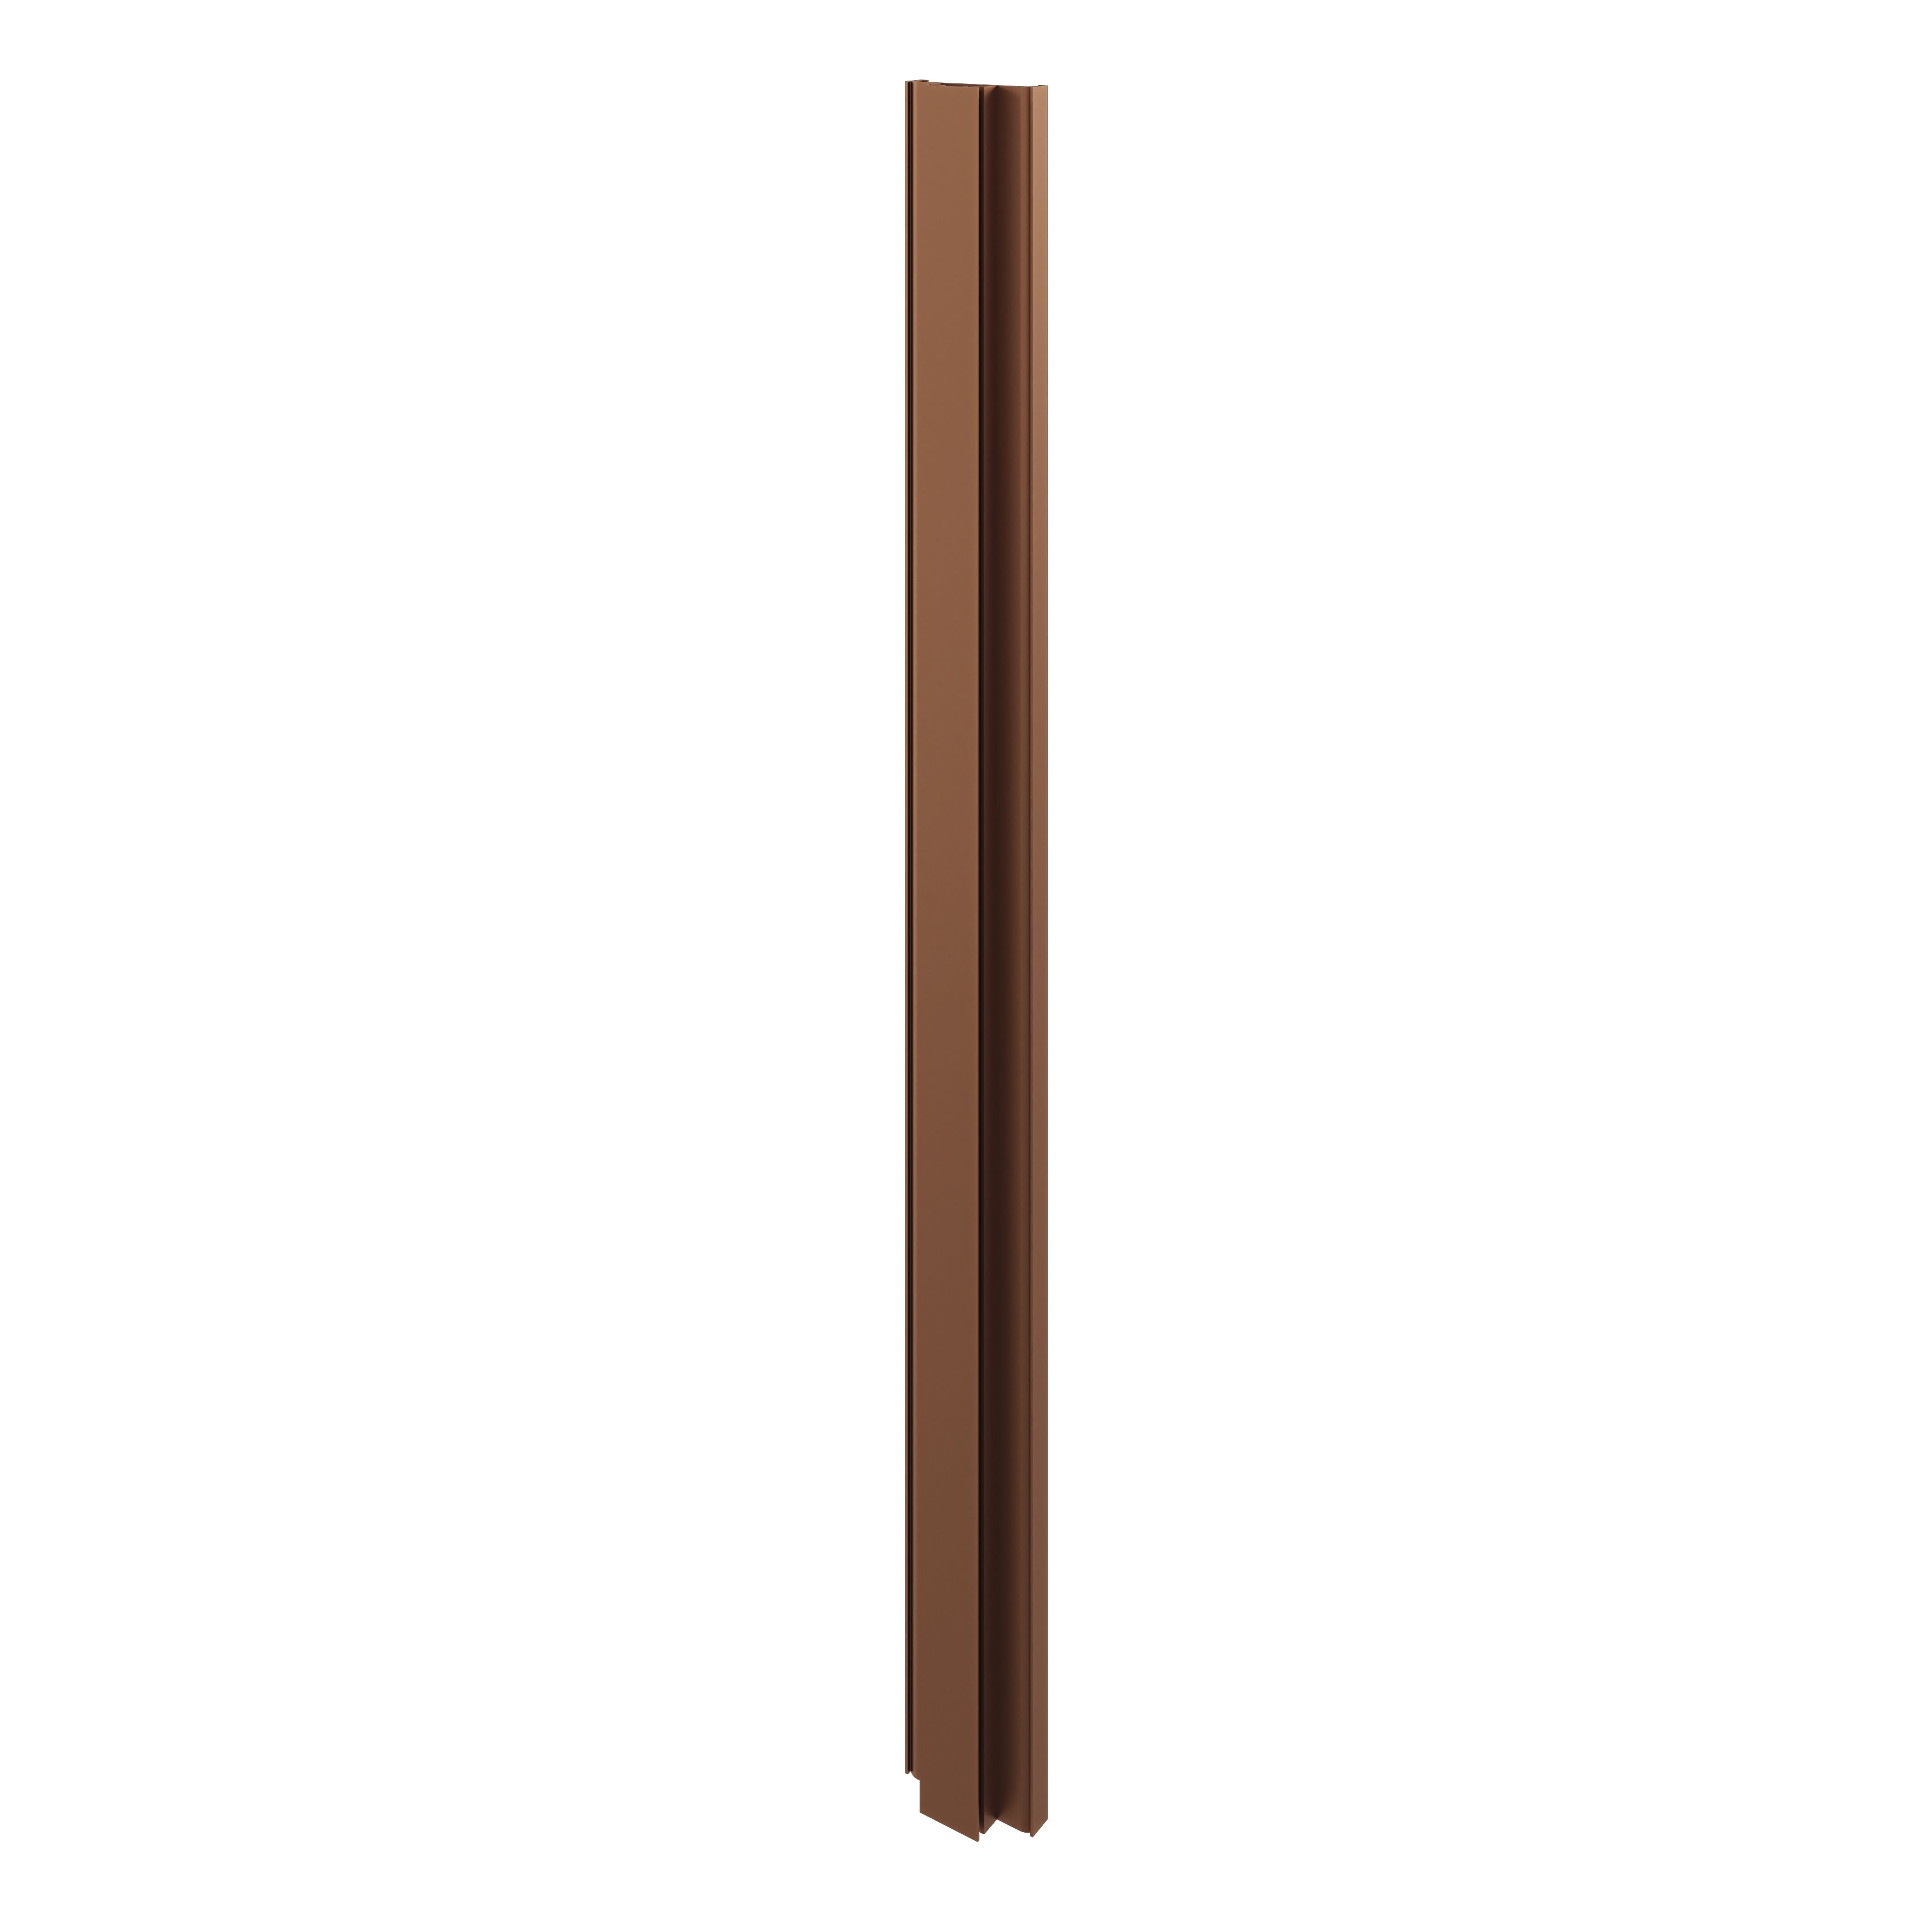 GoodHome Caraway Innovo Satin Copper effect Middle larder rail